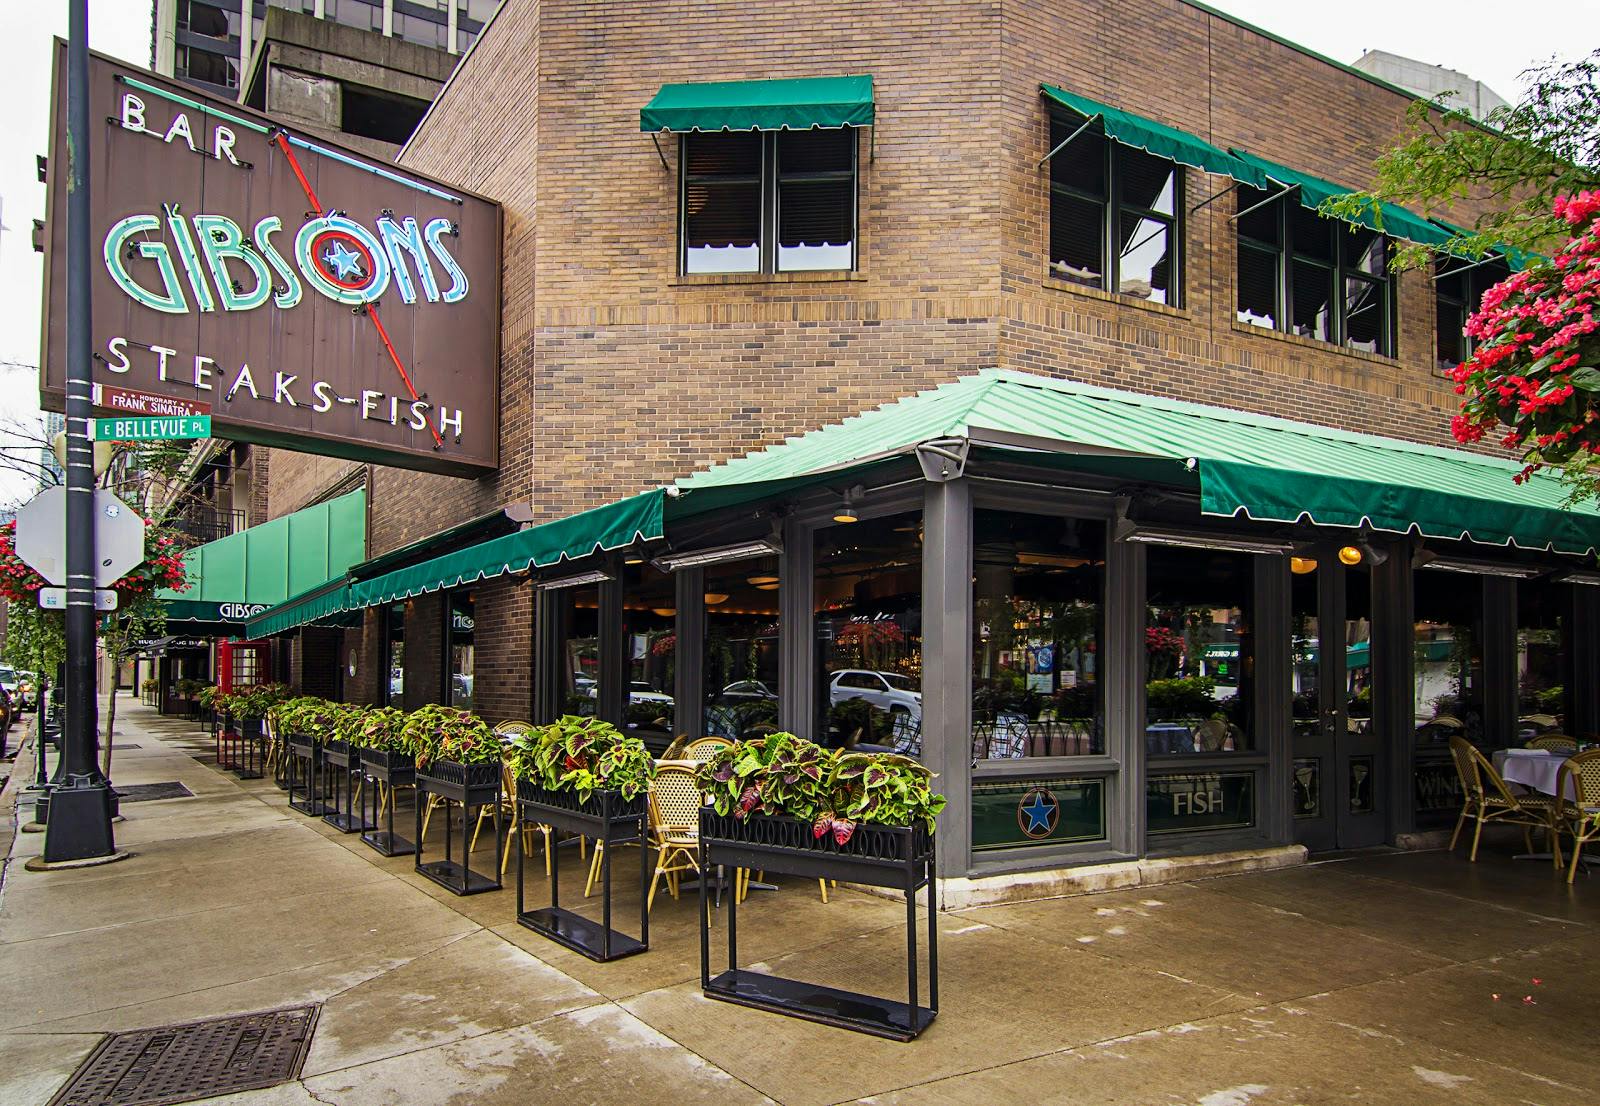 Image - Gibsons Bar & Steakhouse